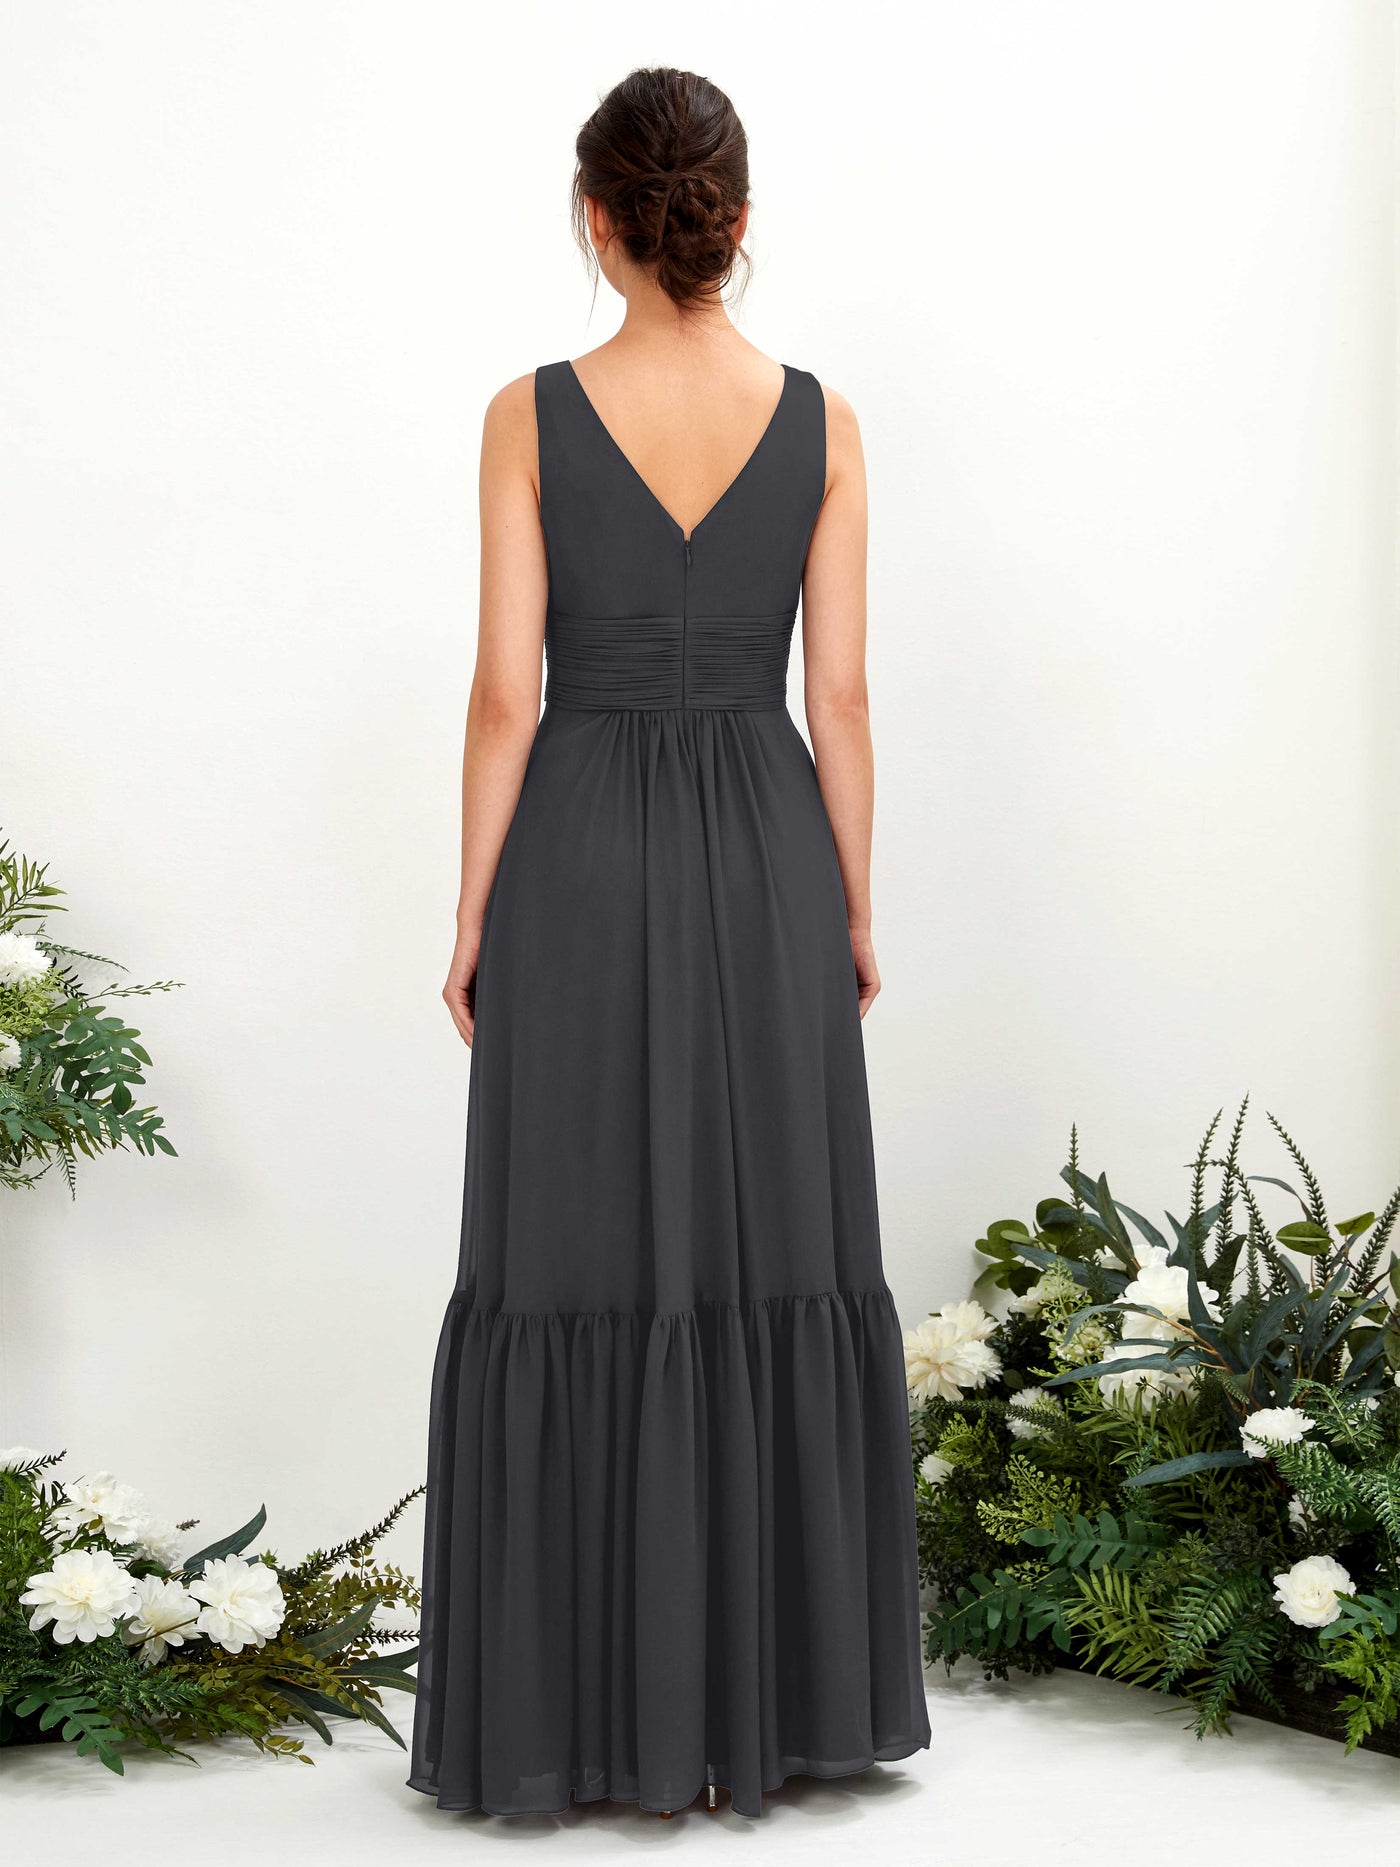 Pewter Bridesmaid Dresses Bridesmaid Dress A-line Chiffon Straps Full Length Sleeveless Wedding Party Dress (80223738)#color_pewter